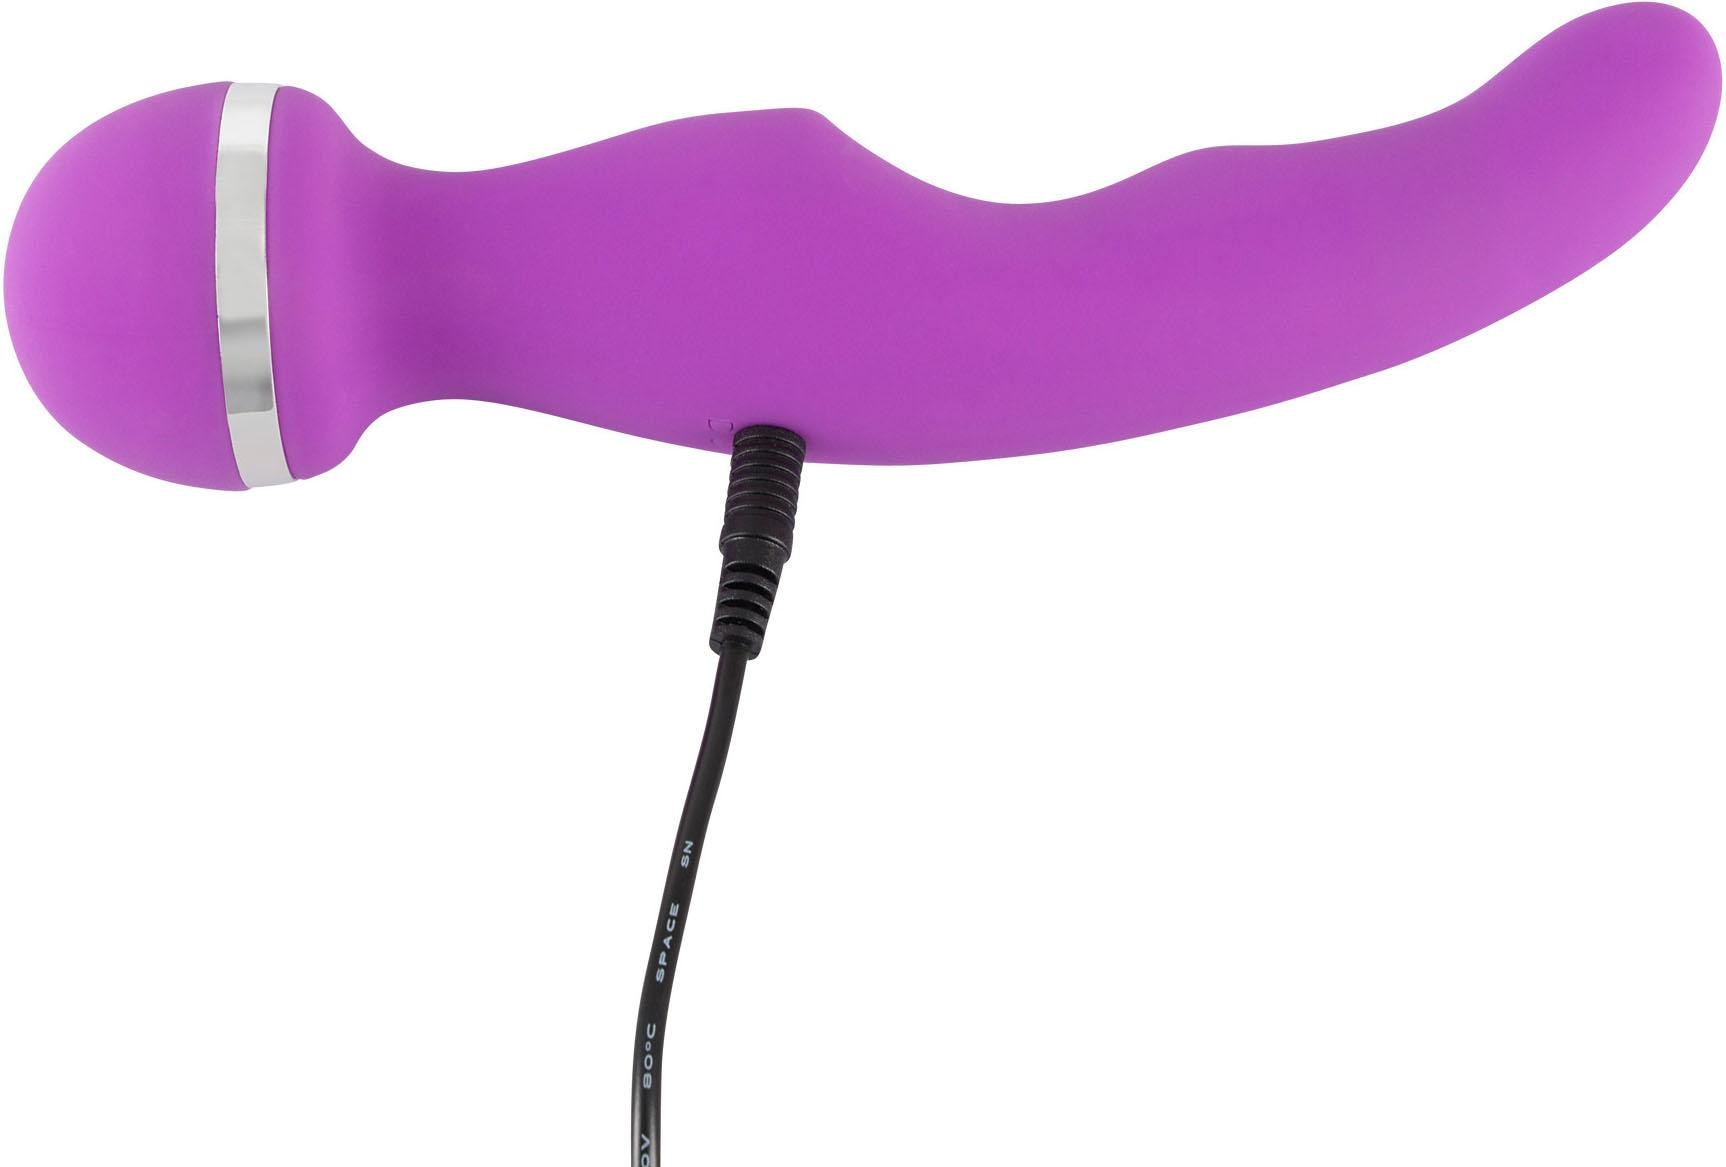 You2Toys Wand Massager »Rechargeable Warming Vibe«, 2-in-1